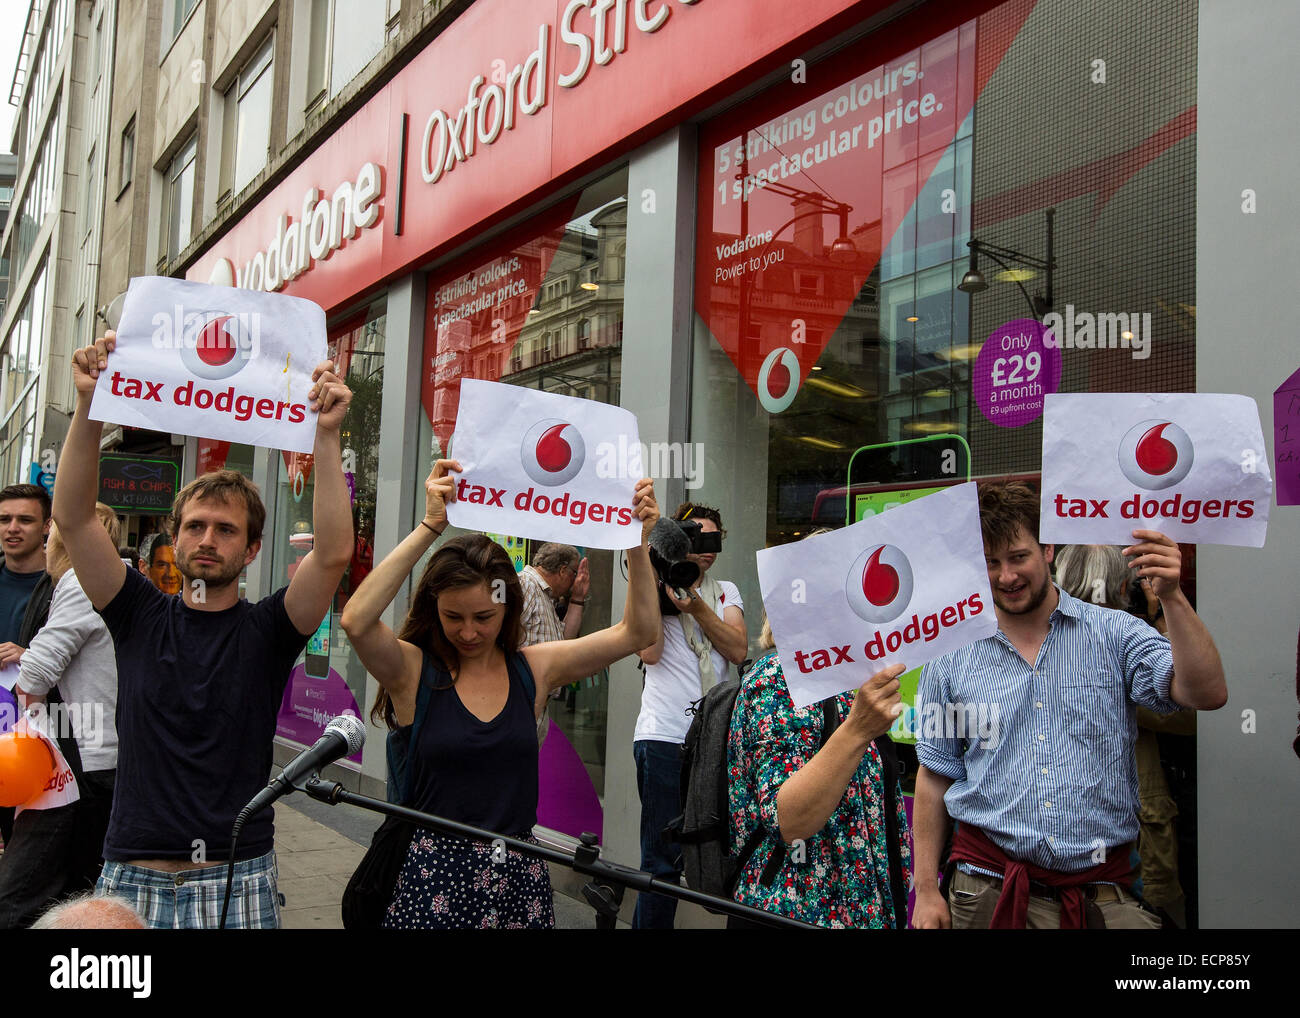 Ukuncut Protest Outside Vodafones Flagship Store On Oxford Street In London To Draw Attention 0718